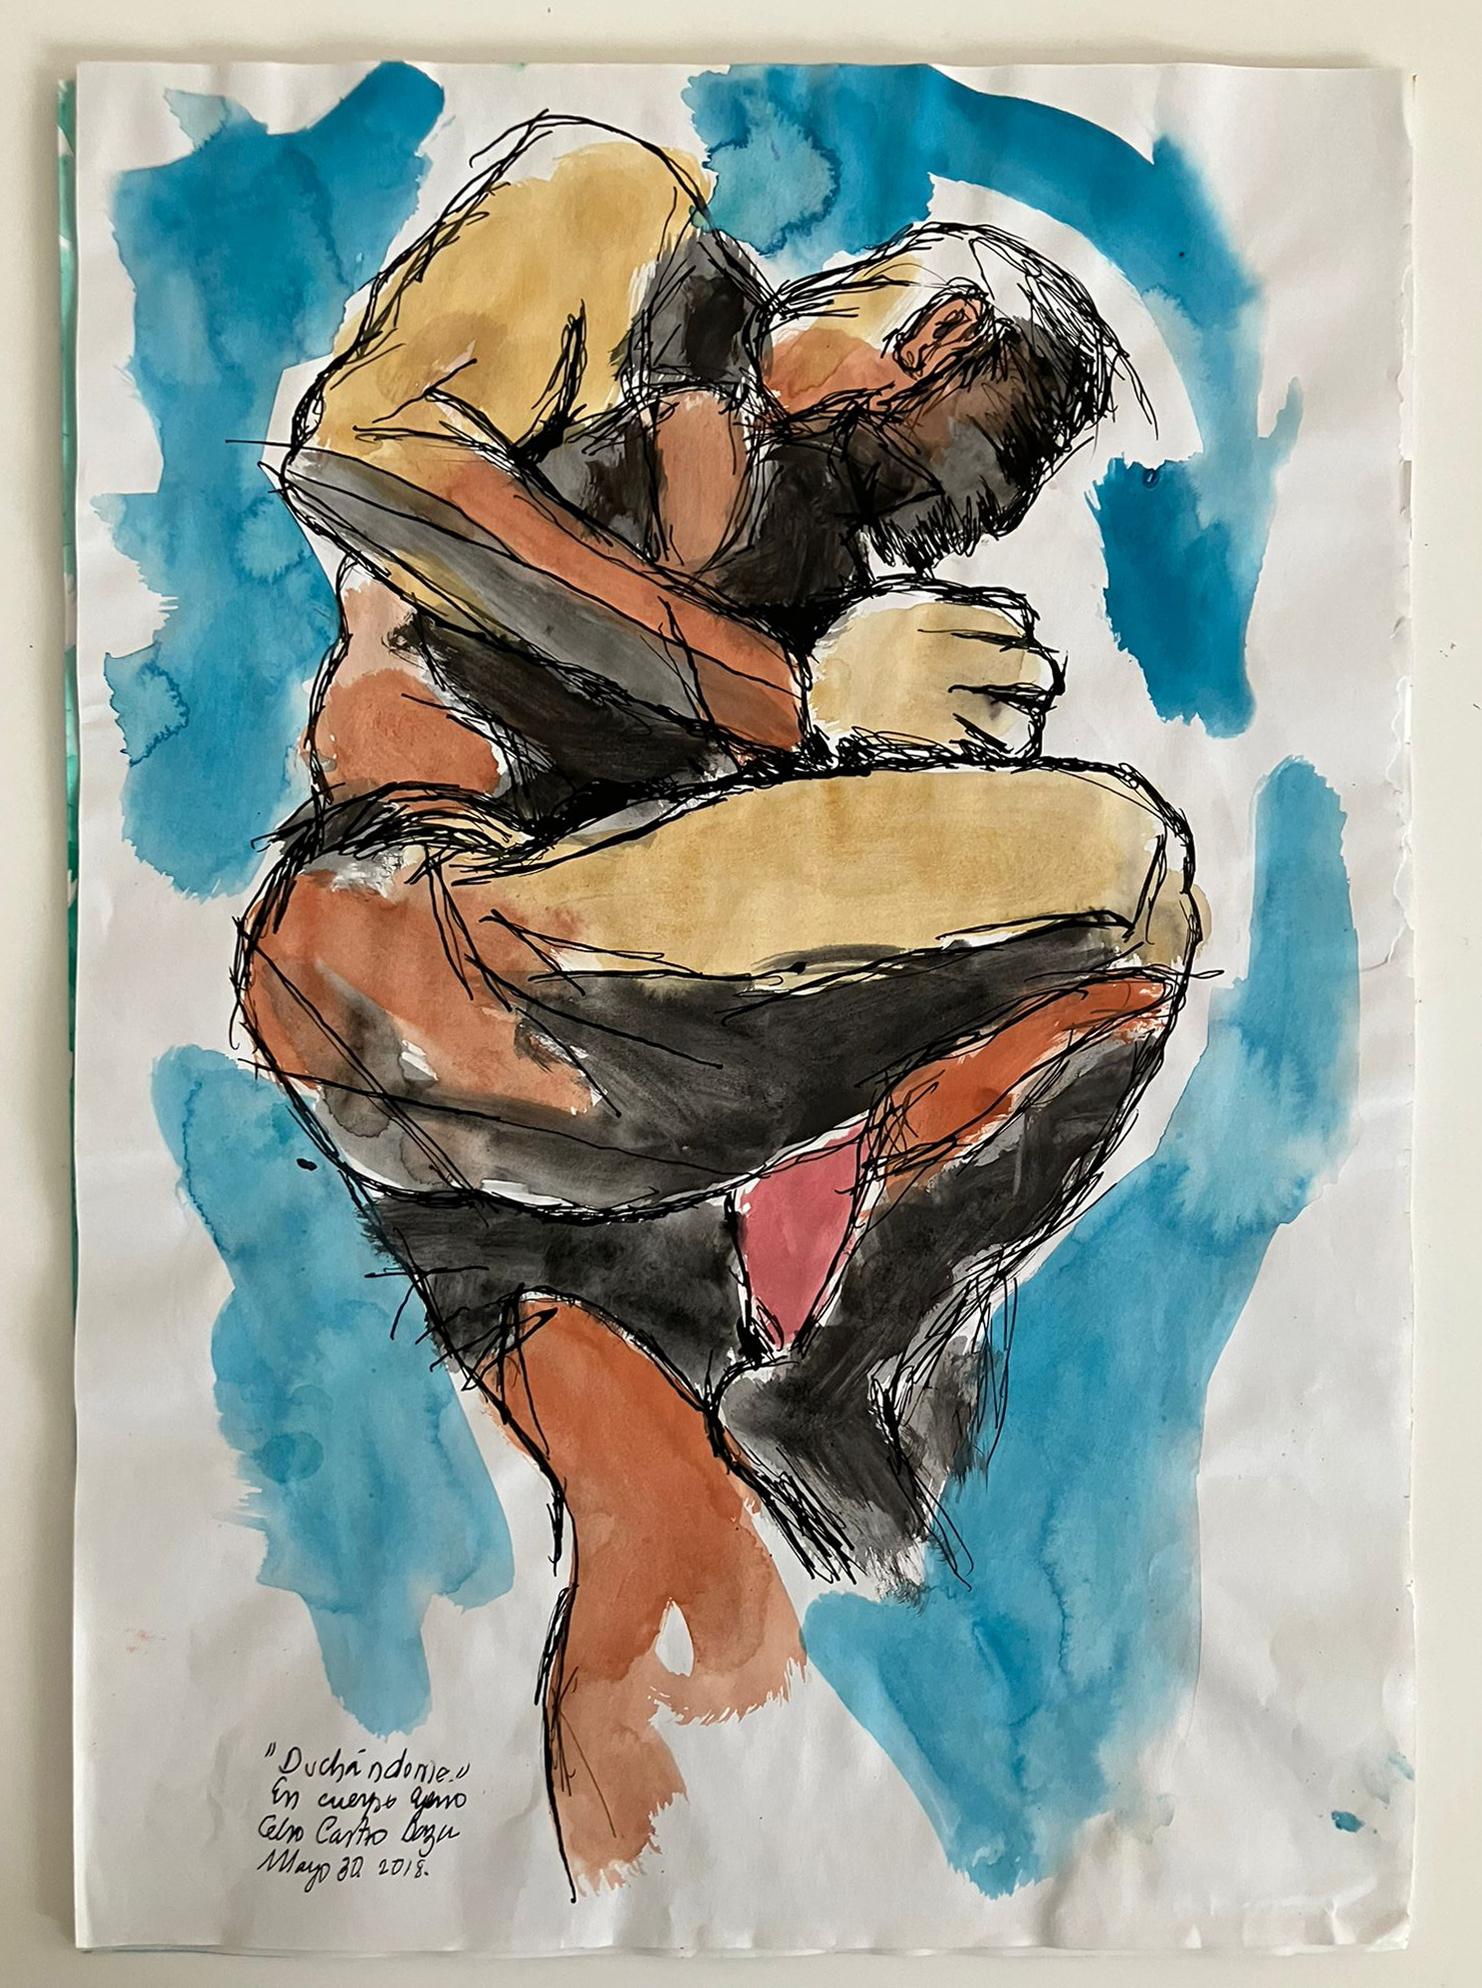 Duchándome en cuerpo Ajeno May 30th, by Celso Castro-Daza
From the Duchándome Series
Watercolor and ink on paper 
Image size: 19.5 in. H x 13.75 in. W
Unframed

____________
Undefined by medium, Celso Castro’s works each carry the presence of the